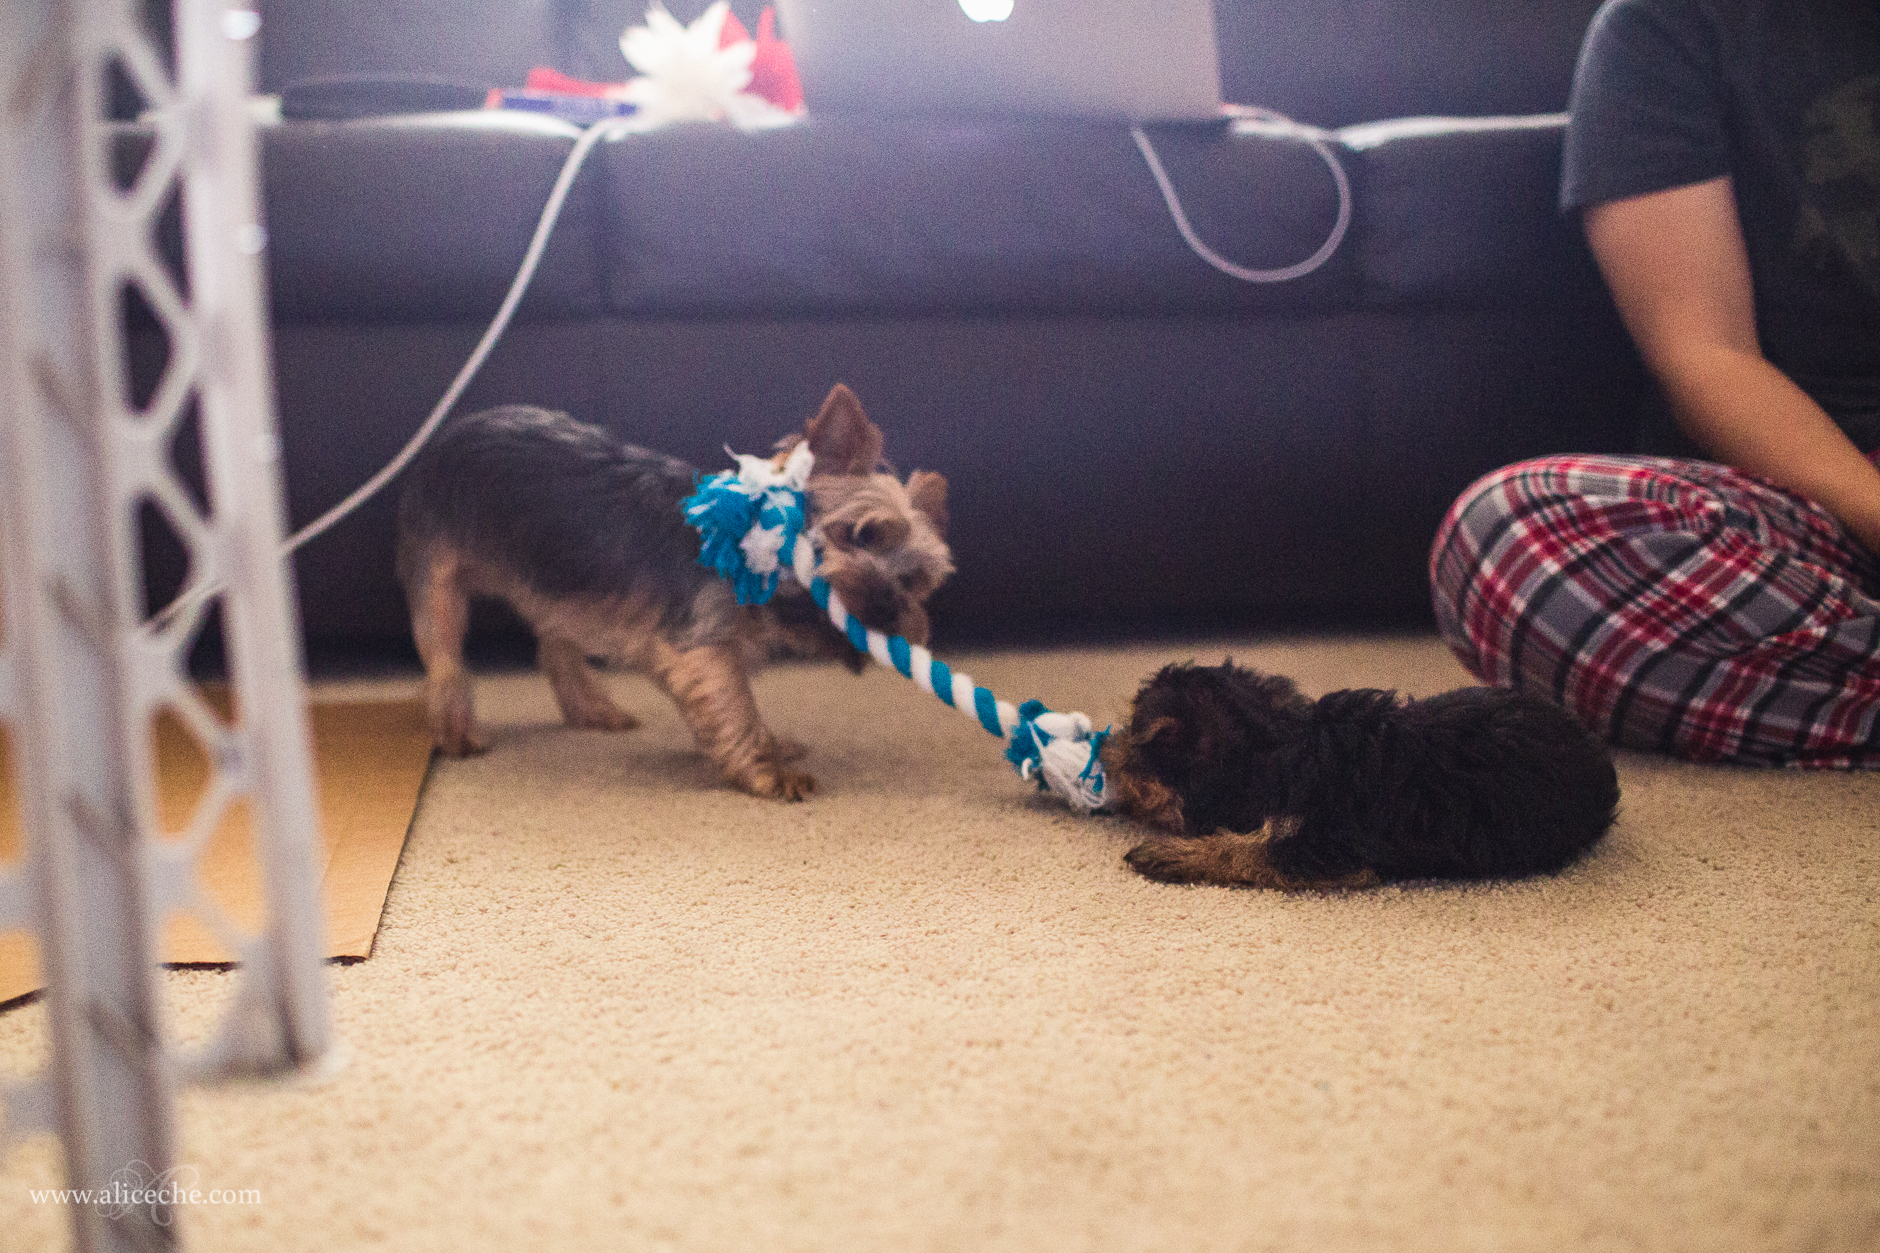 alice-che-photography-yorkshire-terrier-puppy-and-dog-tug-of-war-with-rope